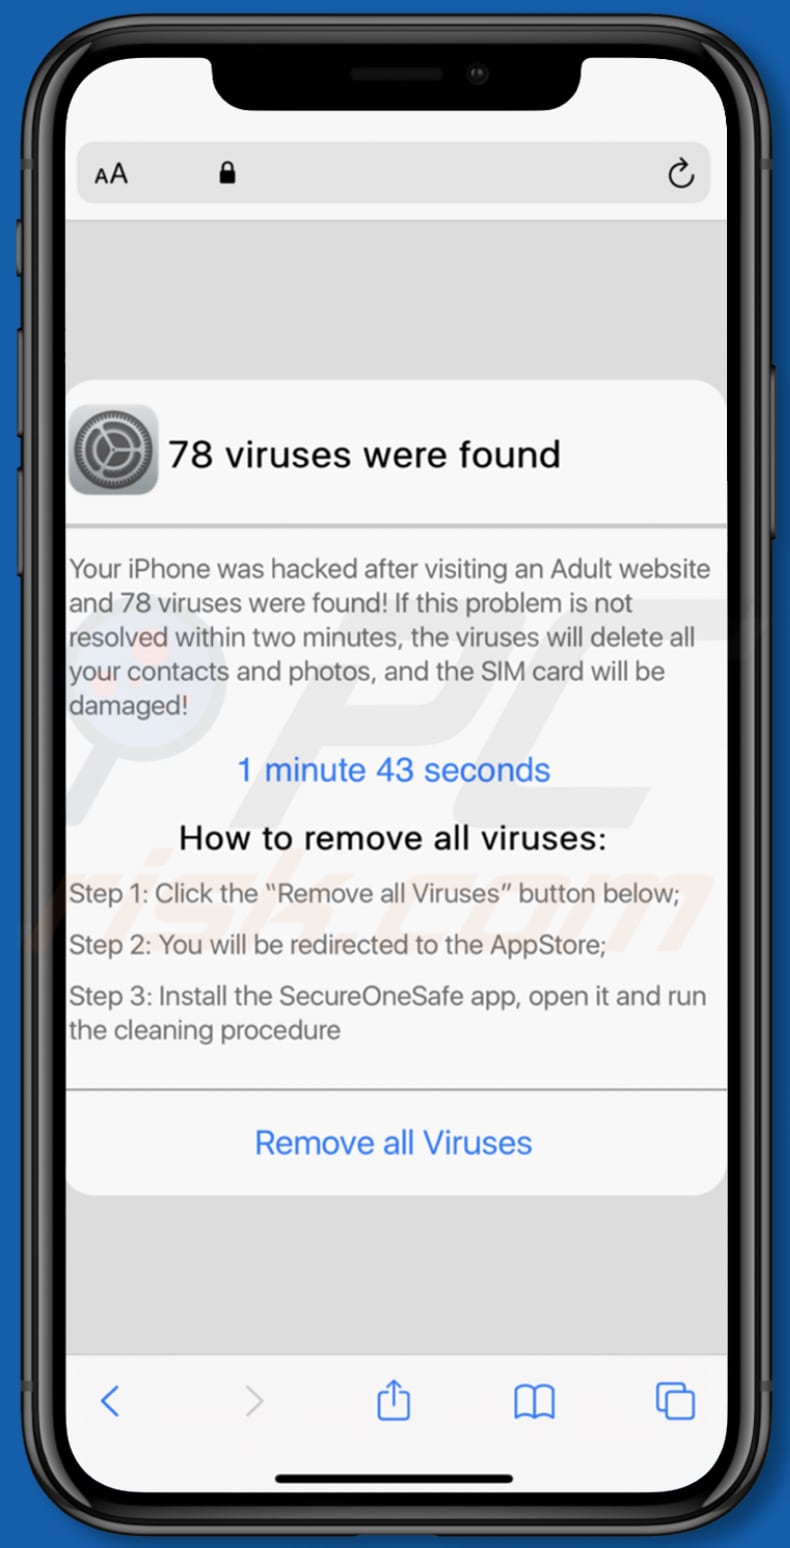 Can iPhones be hacked by viruses?